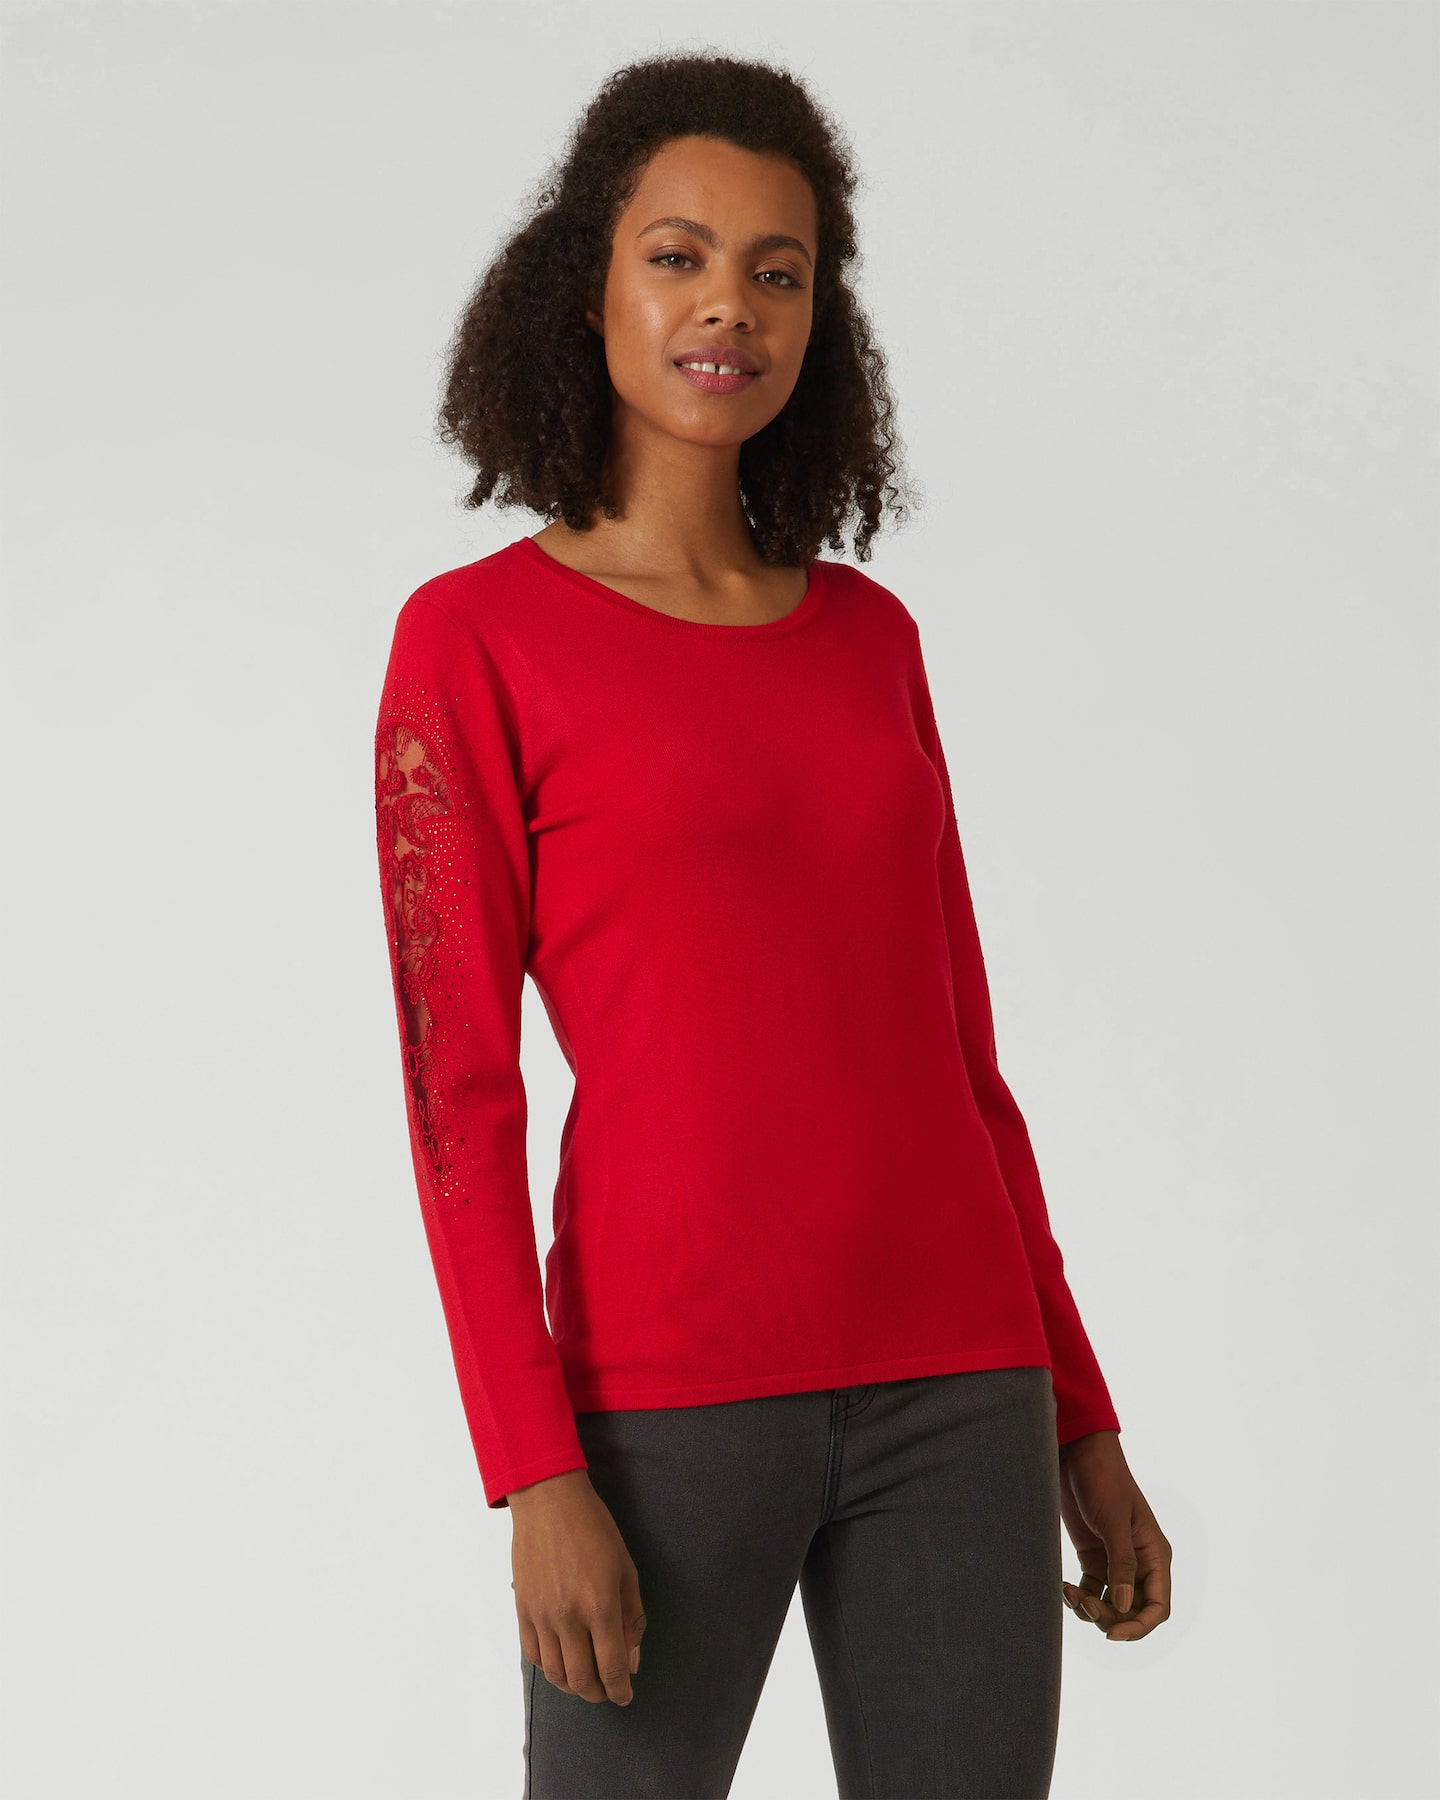 Glow Pullover Glamour, online